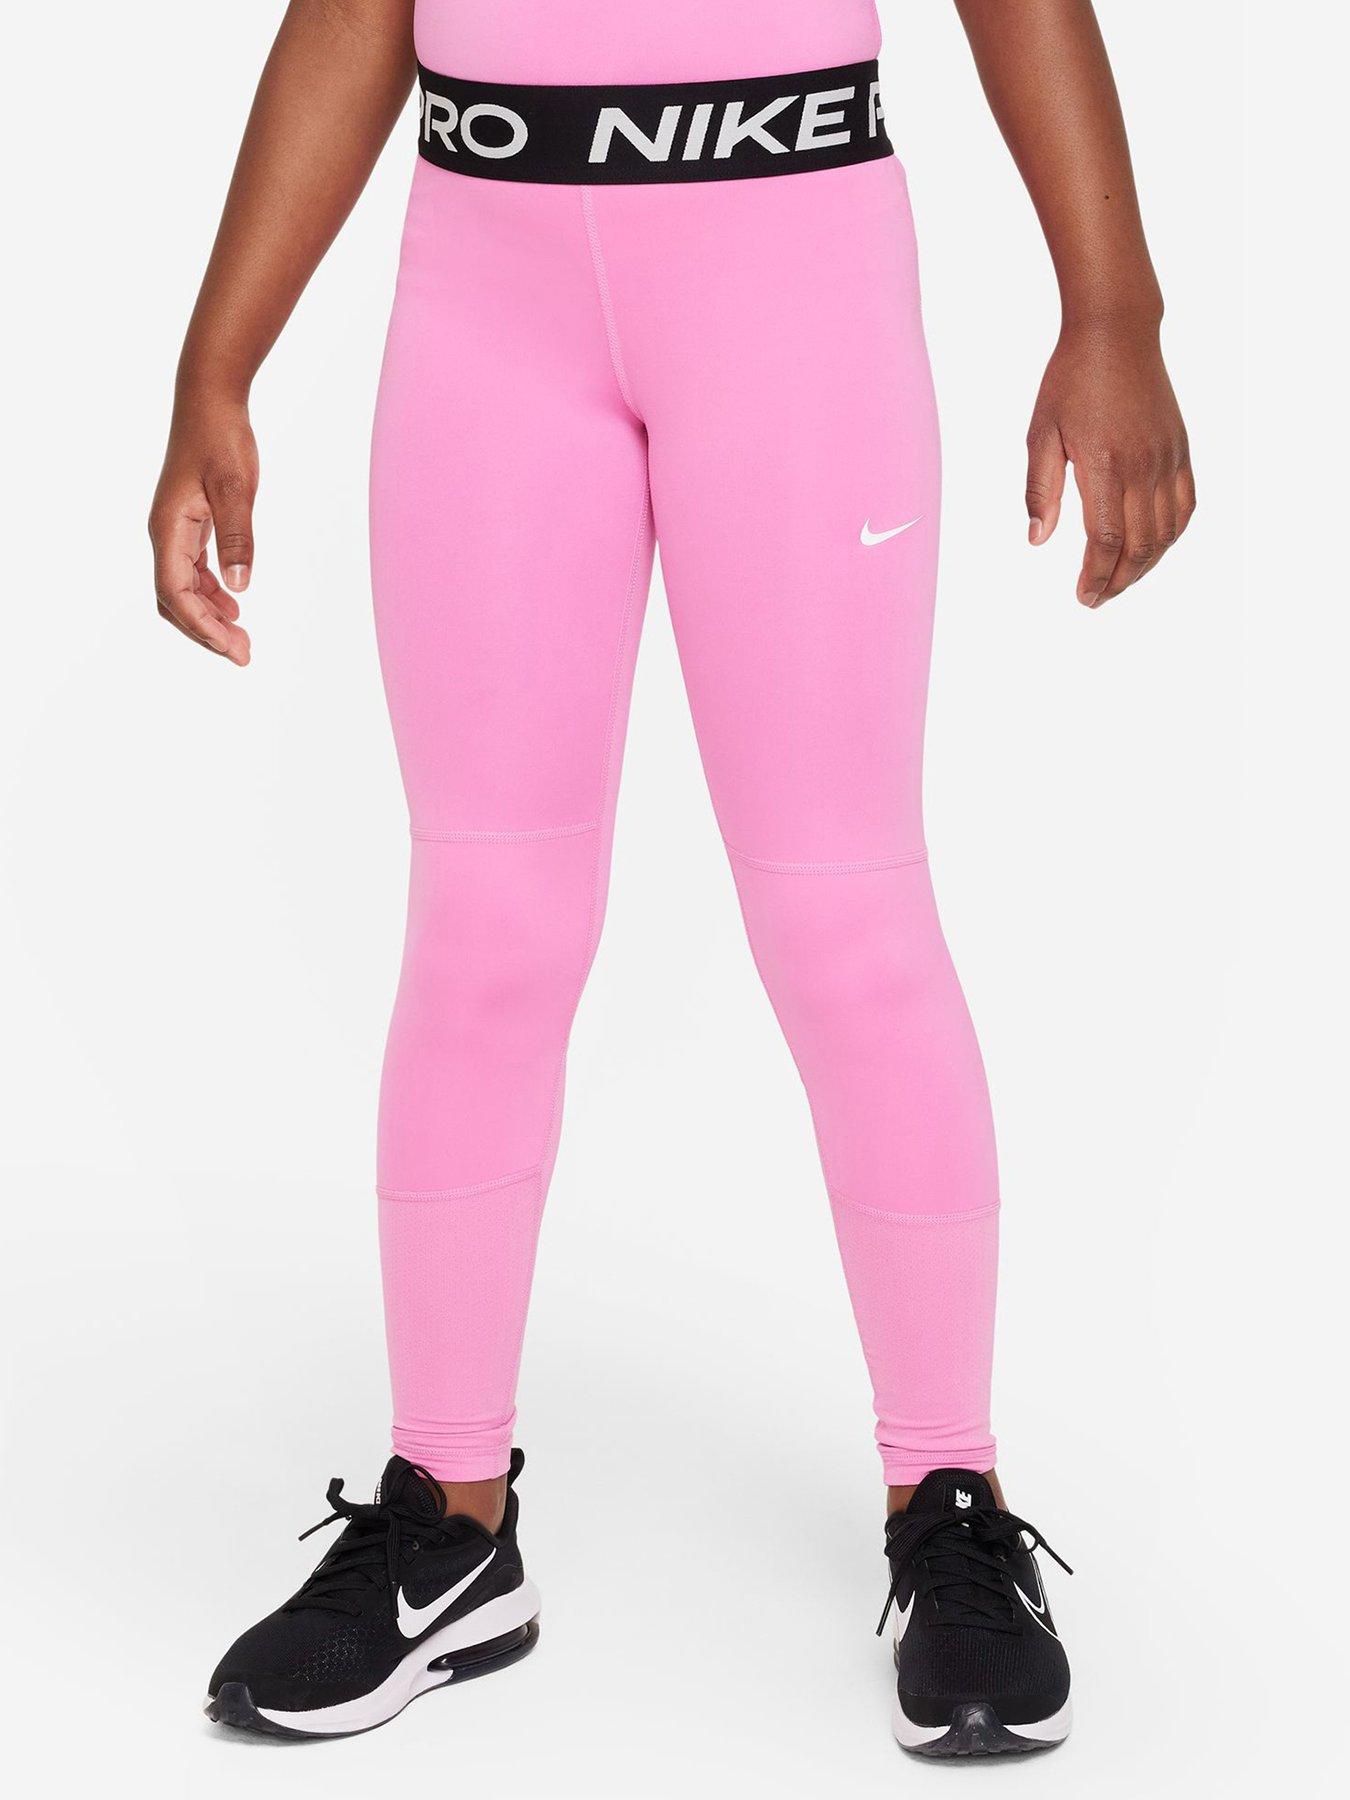 Nike Bright Pink Performance High Waisted Pro Leggings